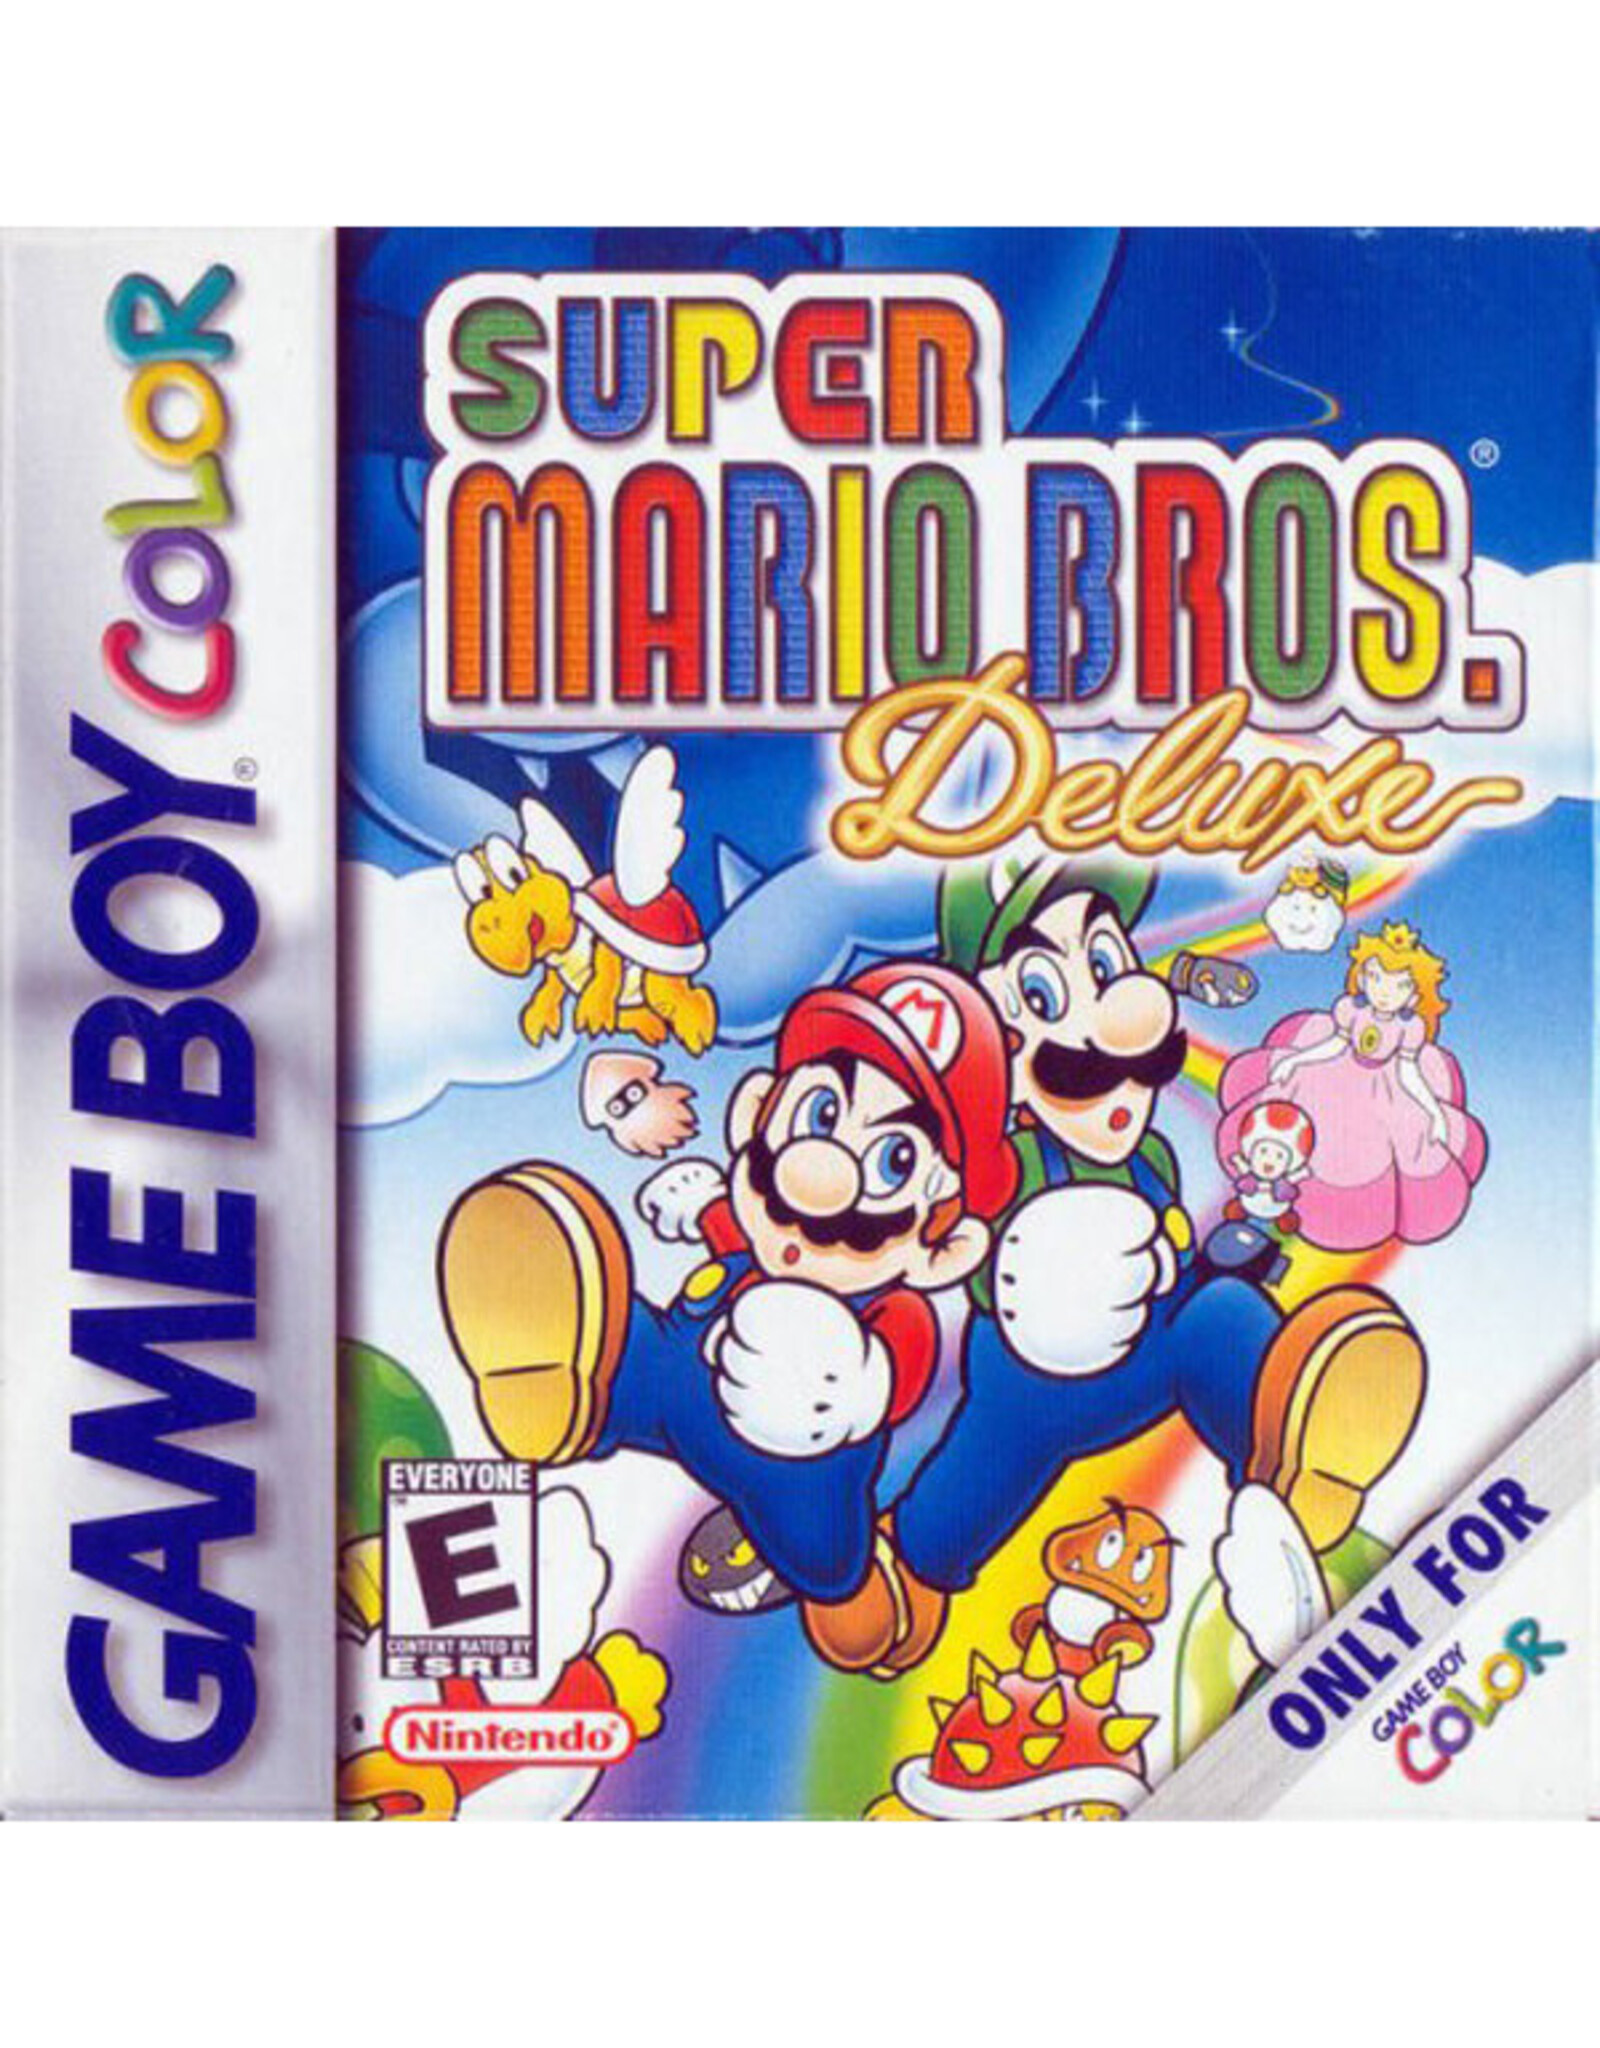 Used Game - Game Boy Color - Super Mario Bros Deluxe [Cart Only]